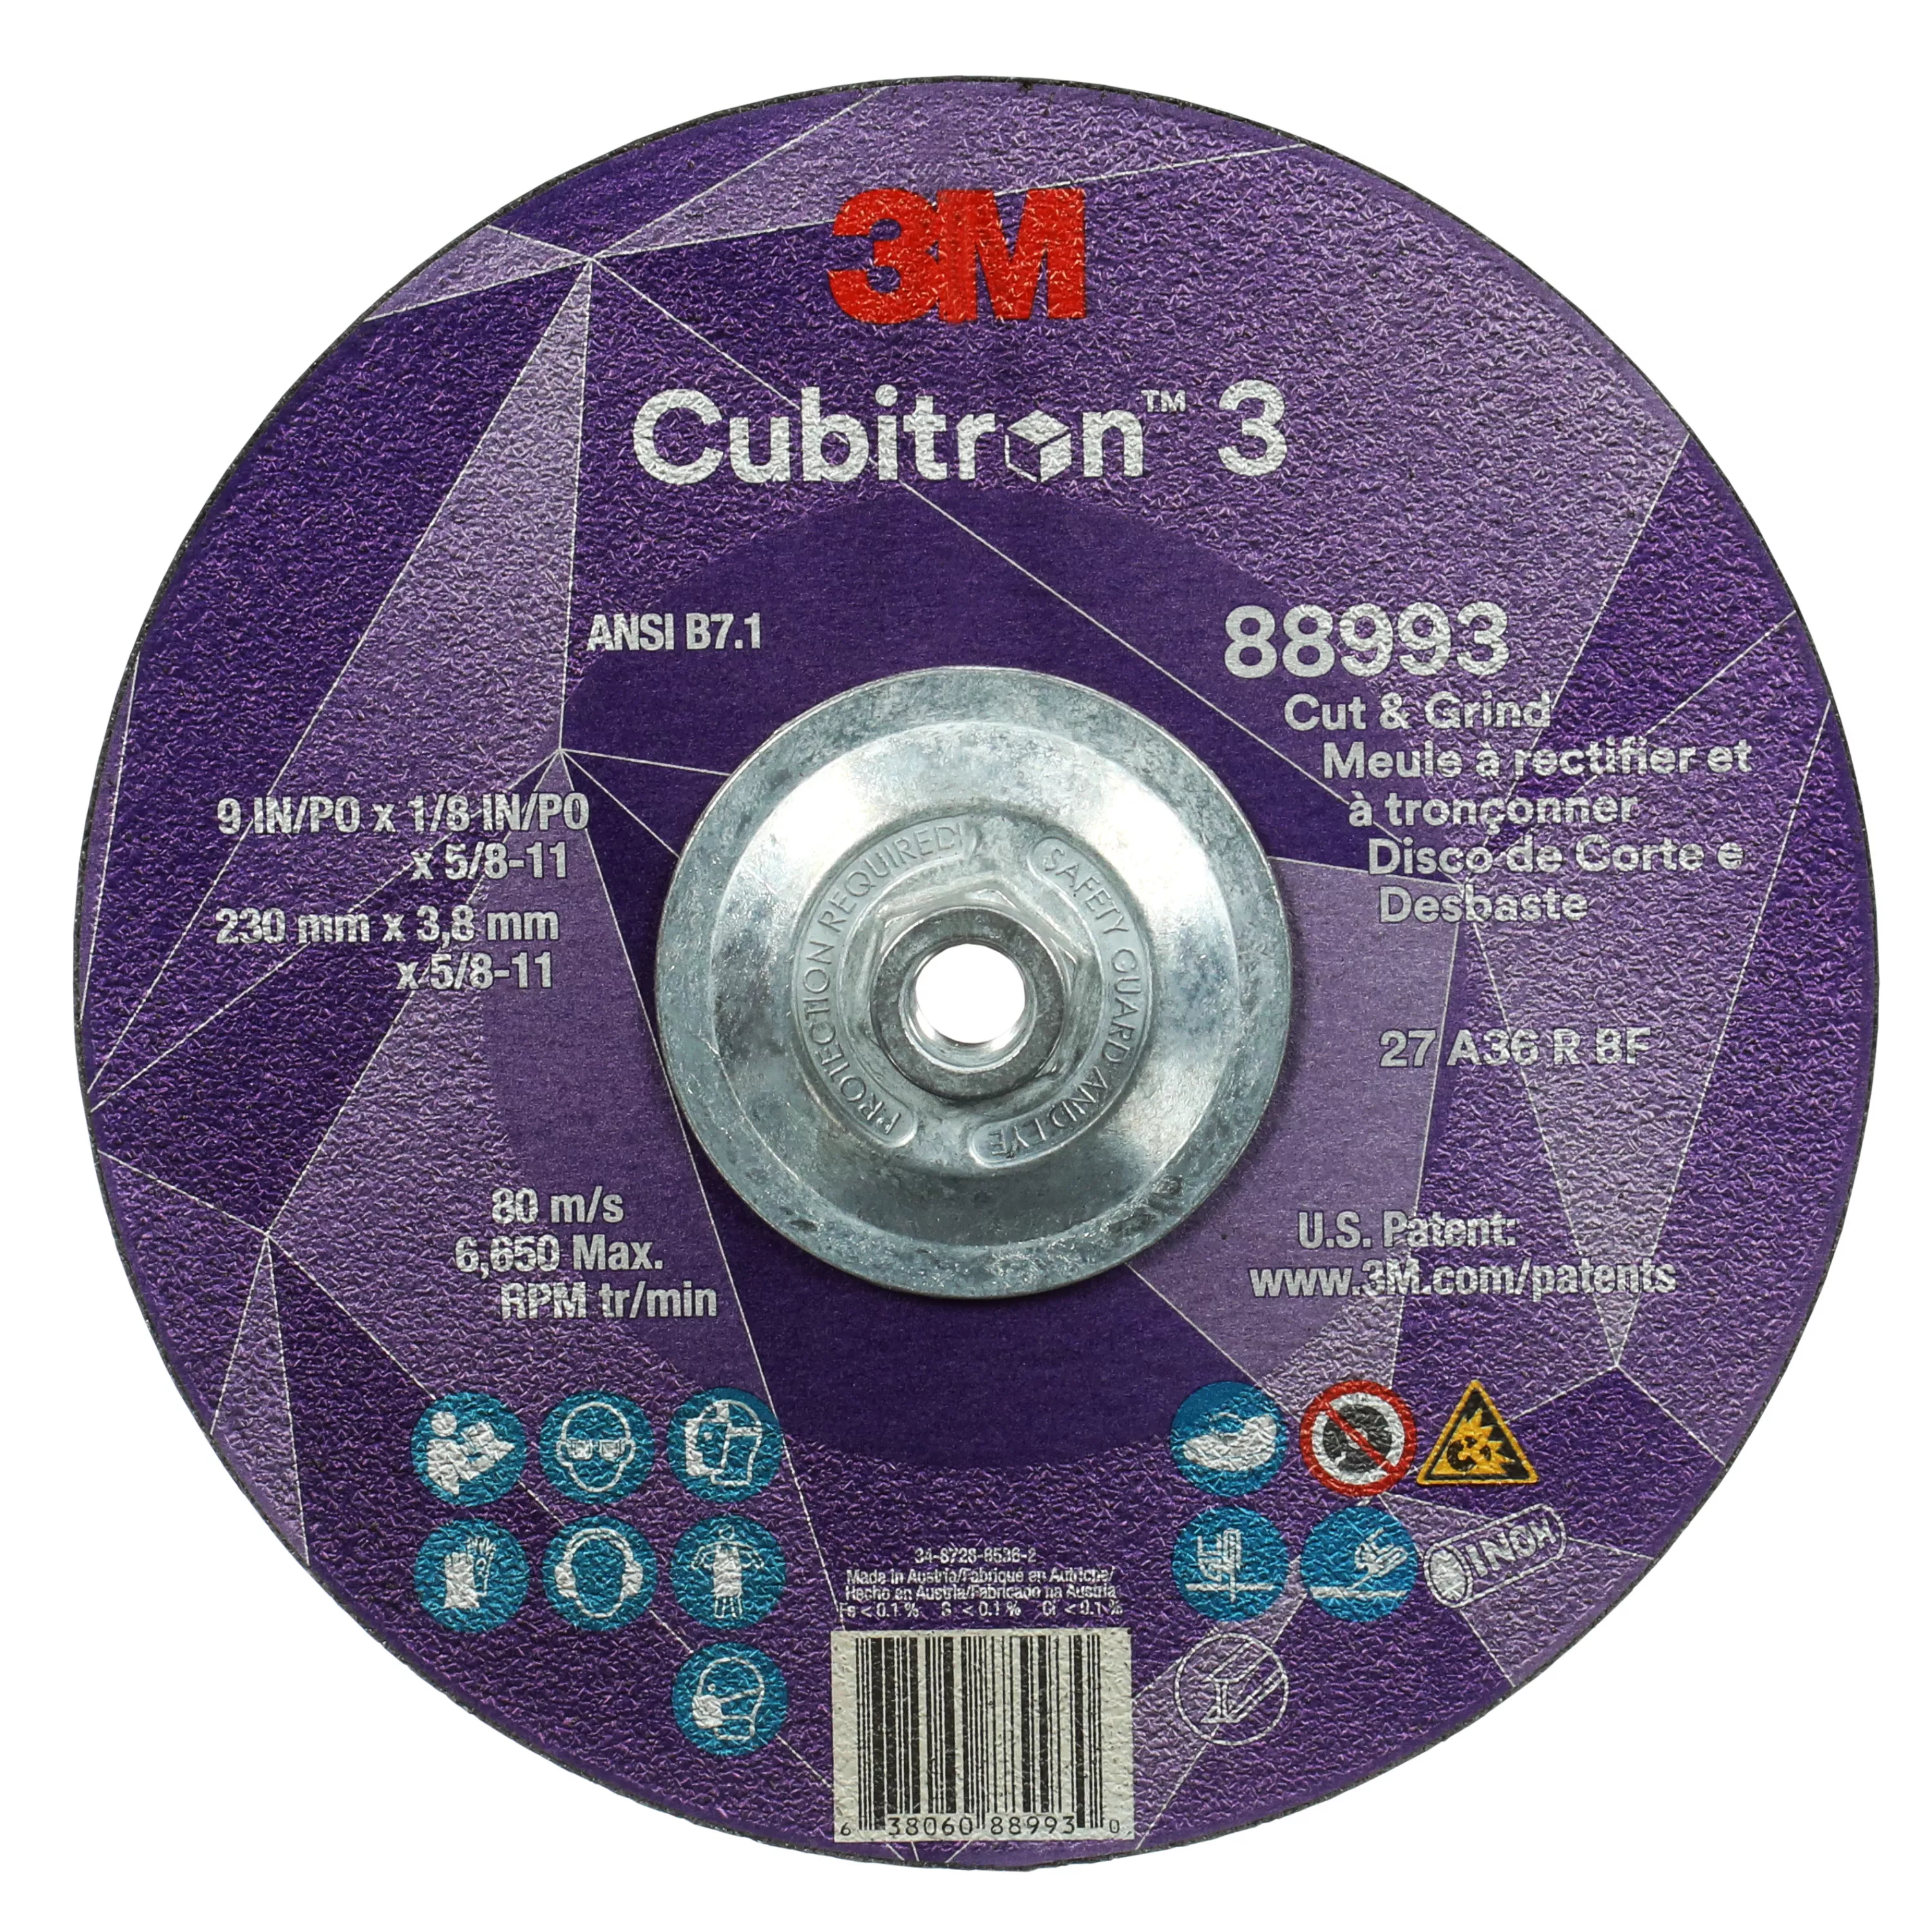 3M™ Cubitron™ 3 Cut and Grind Wheel, 88993, 36+, T27, 9 in x 1/8 in x
5/8 in-11 (230 x 3.2 mm x 5/8-11 in), ANSI, 10 ea/Case